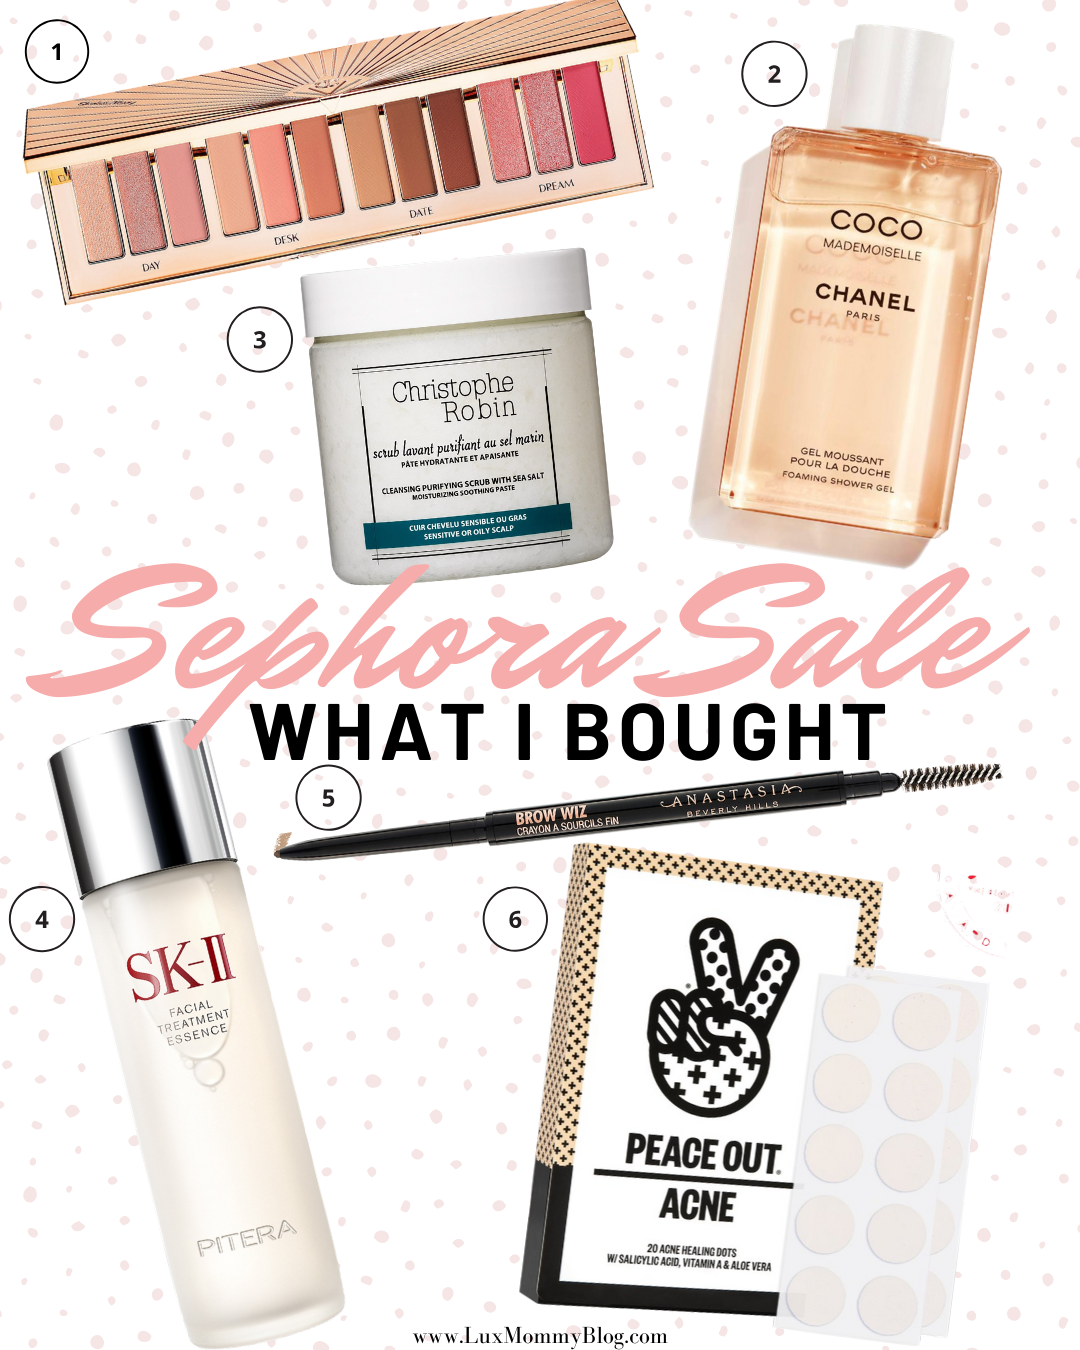 Sephora Sale - What I Bought, LuxMommy